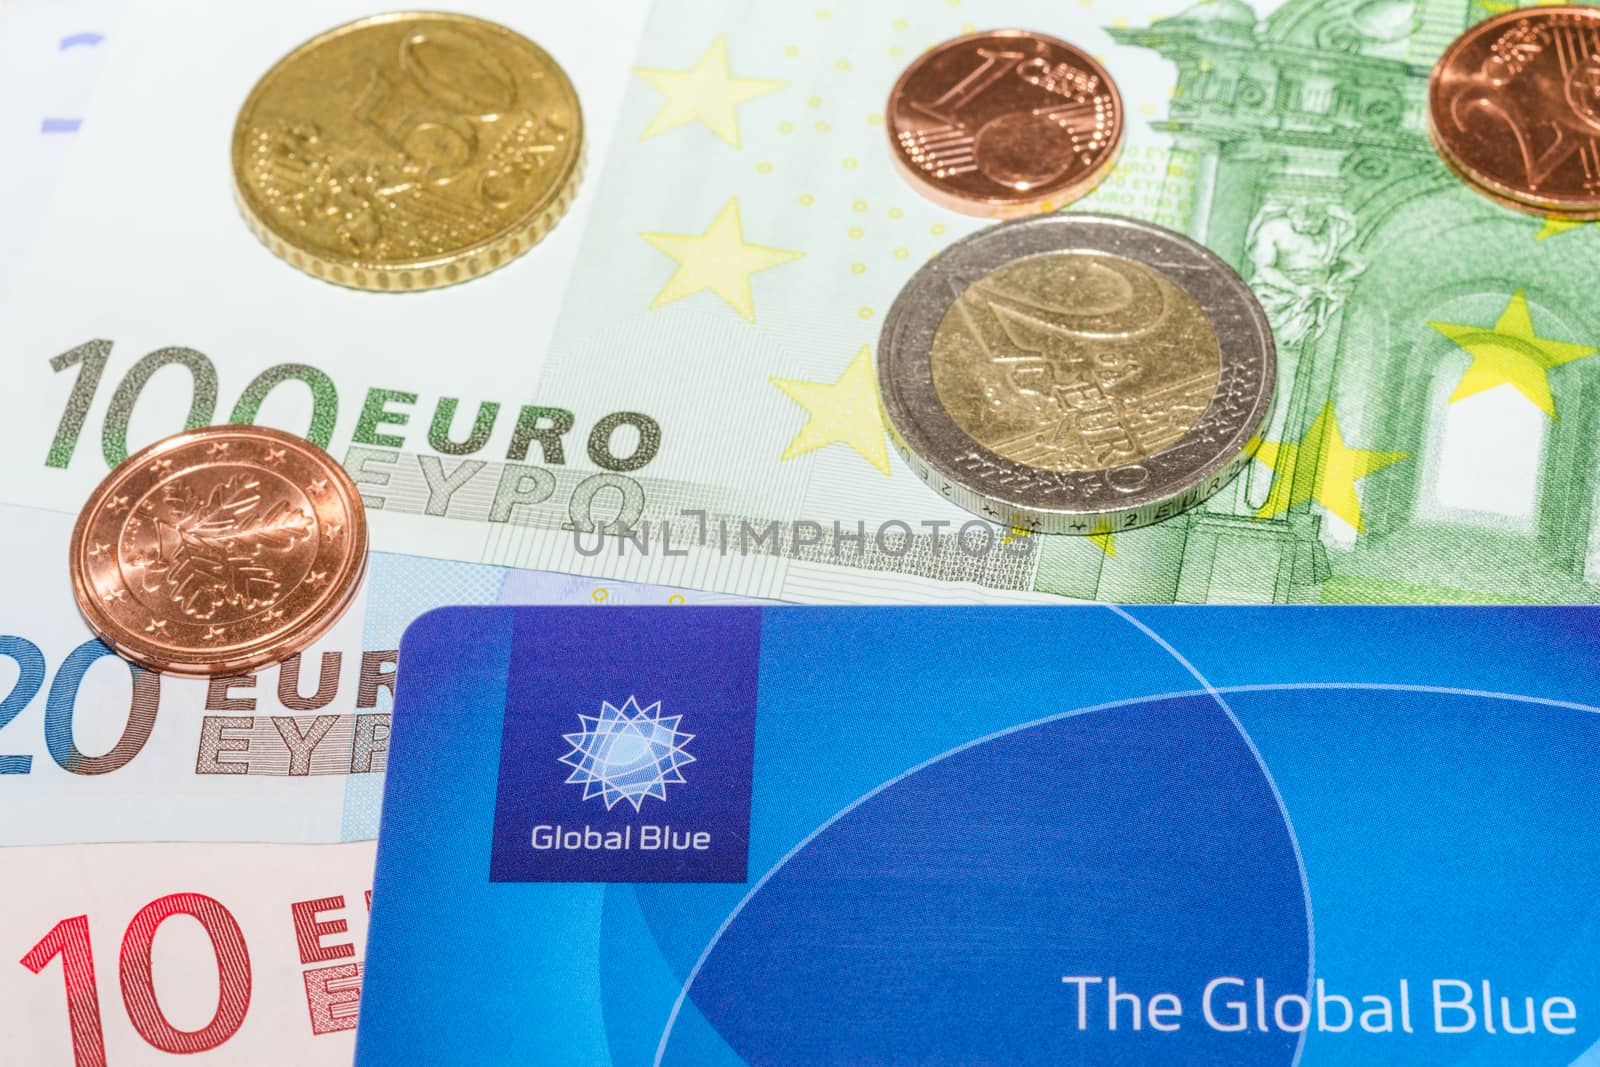 European Euro bank notes Cent coins and Global Blue card by servickuz